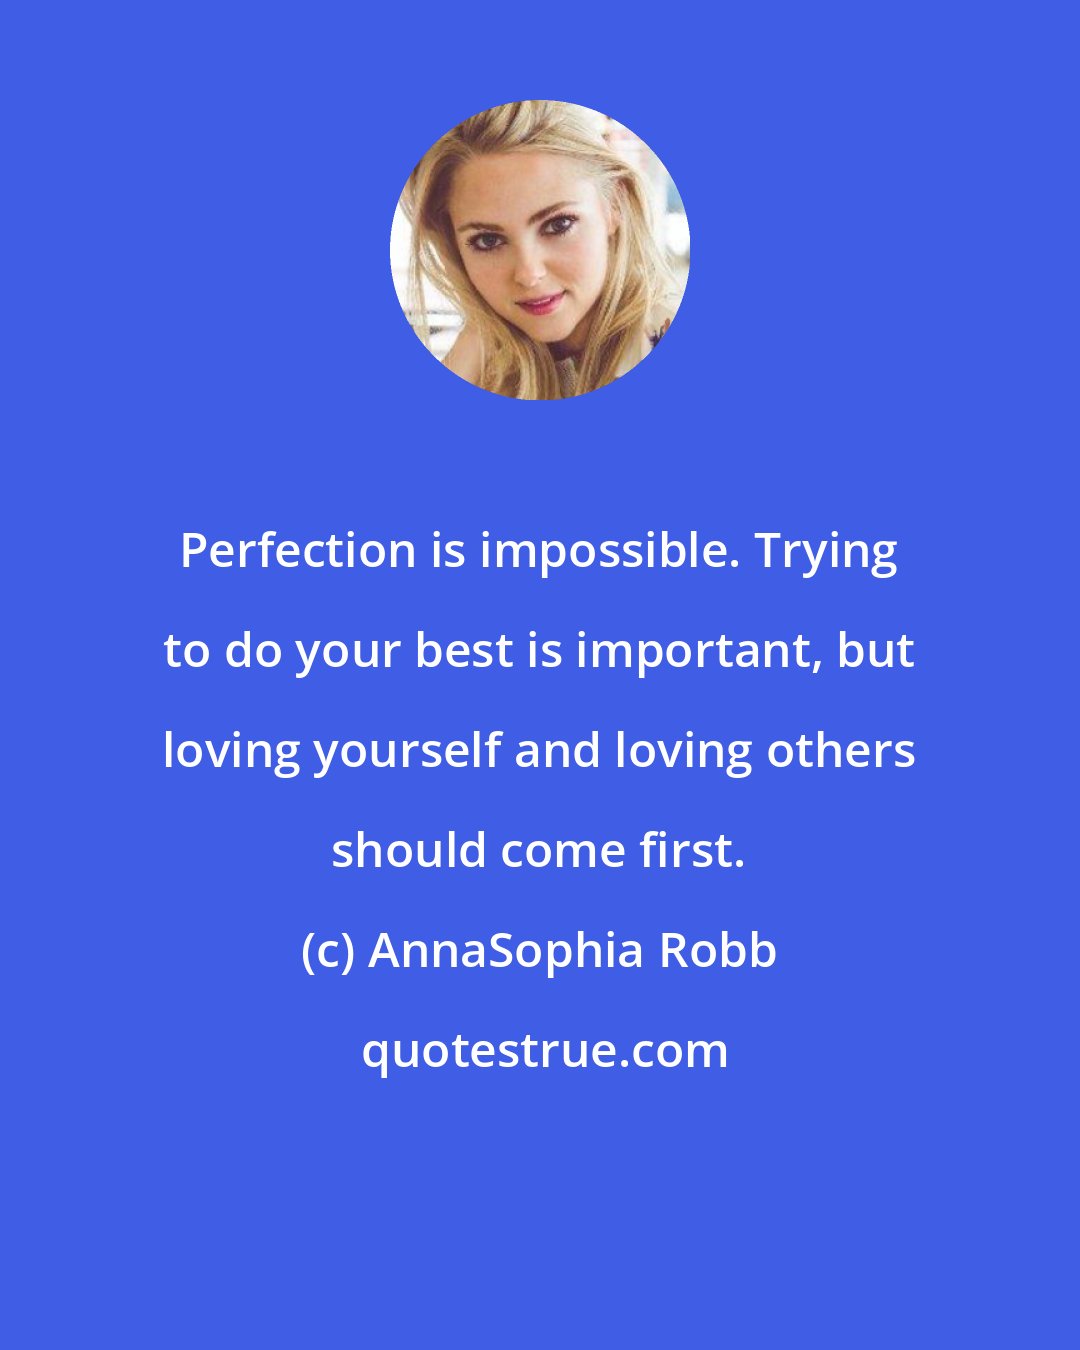 AnnaSophia Robb: Perfection is impossible. Trying to do your best is important, but loving yourself and loving others should come first.